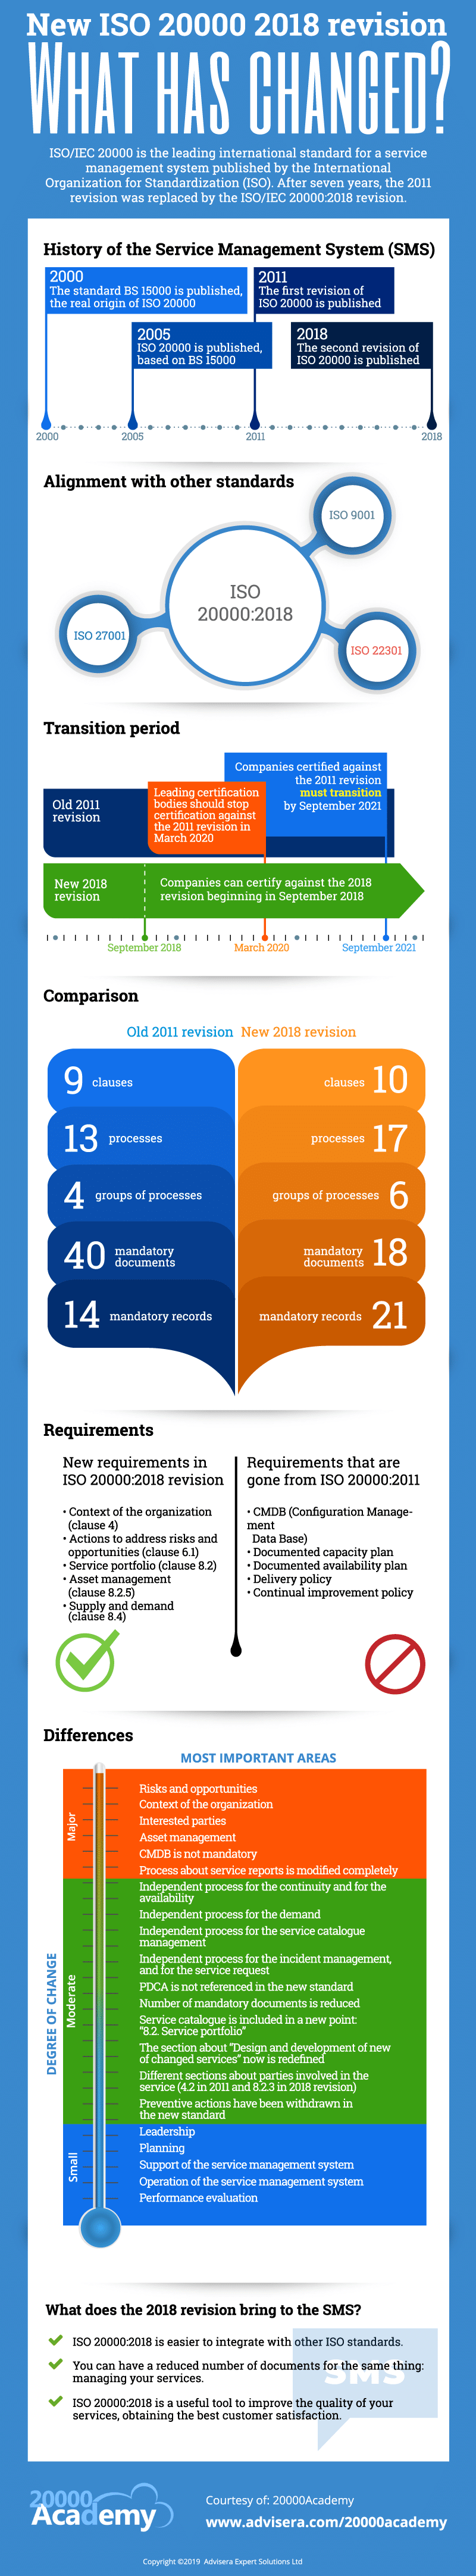 ISO 20000 version 2018 vs. 2011: Main changes [Infographic]